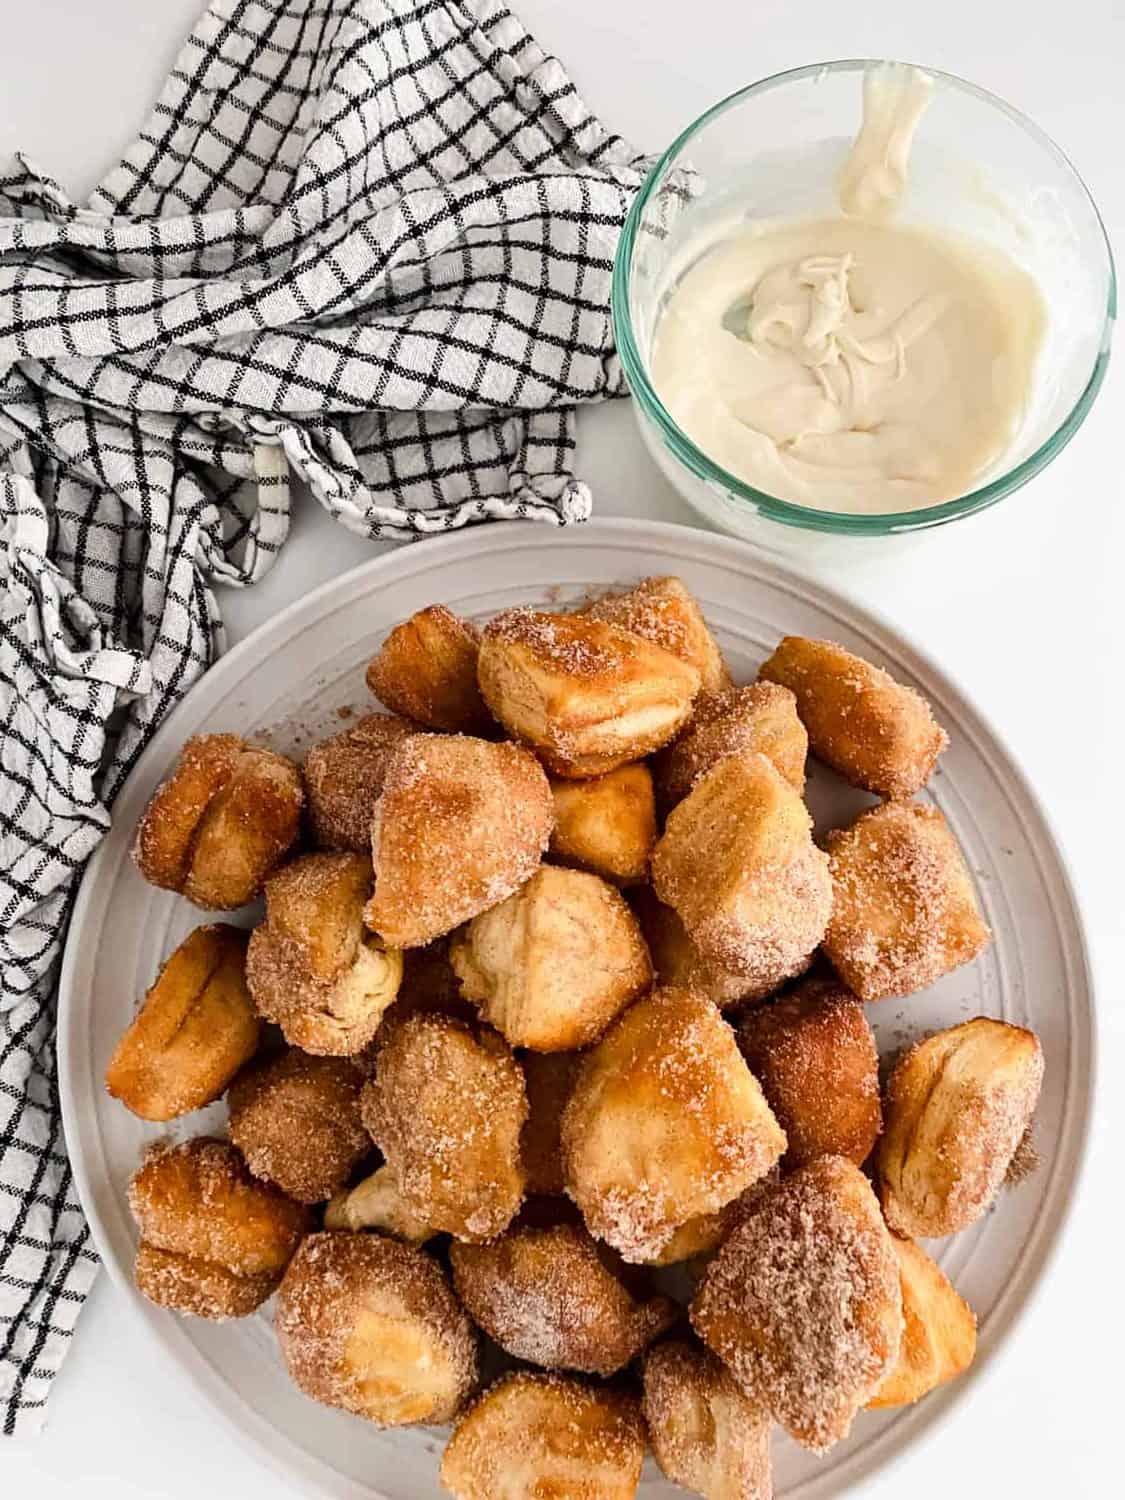 Air fryer donut holes on a plate with icing in a glass bowl beside.